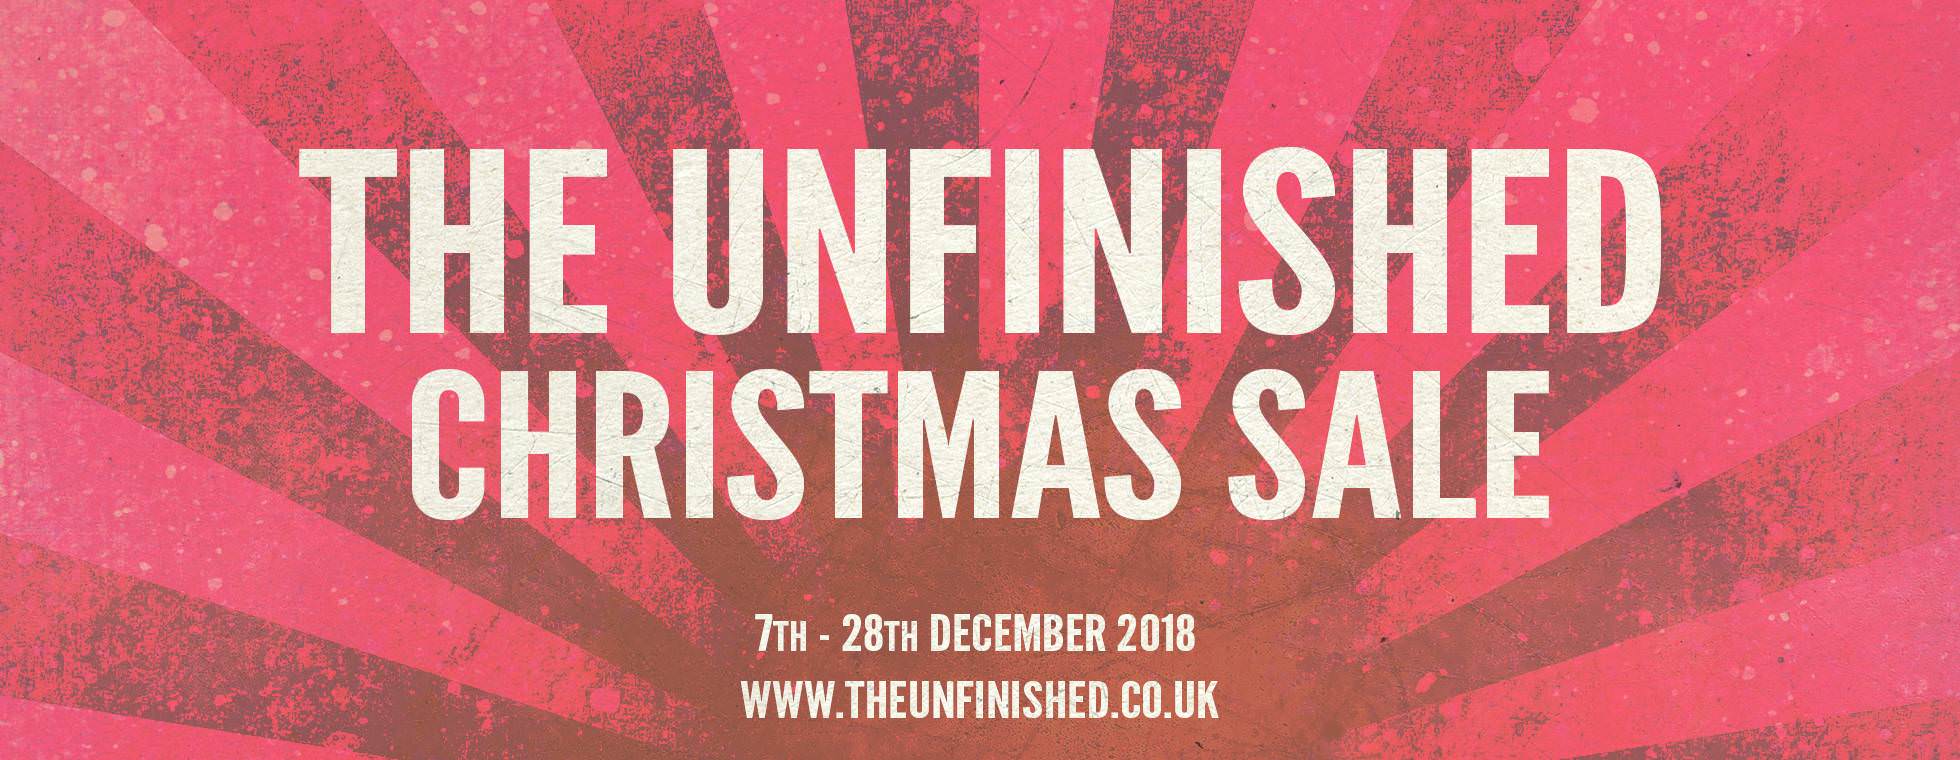 The Unfinished Christmas Sale!